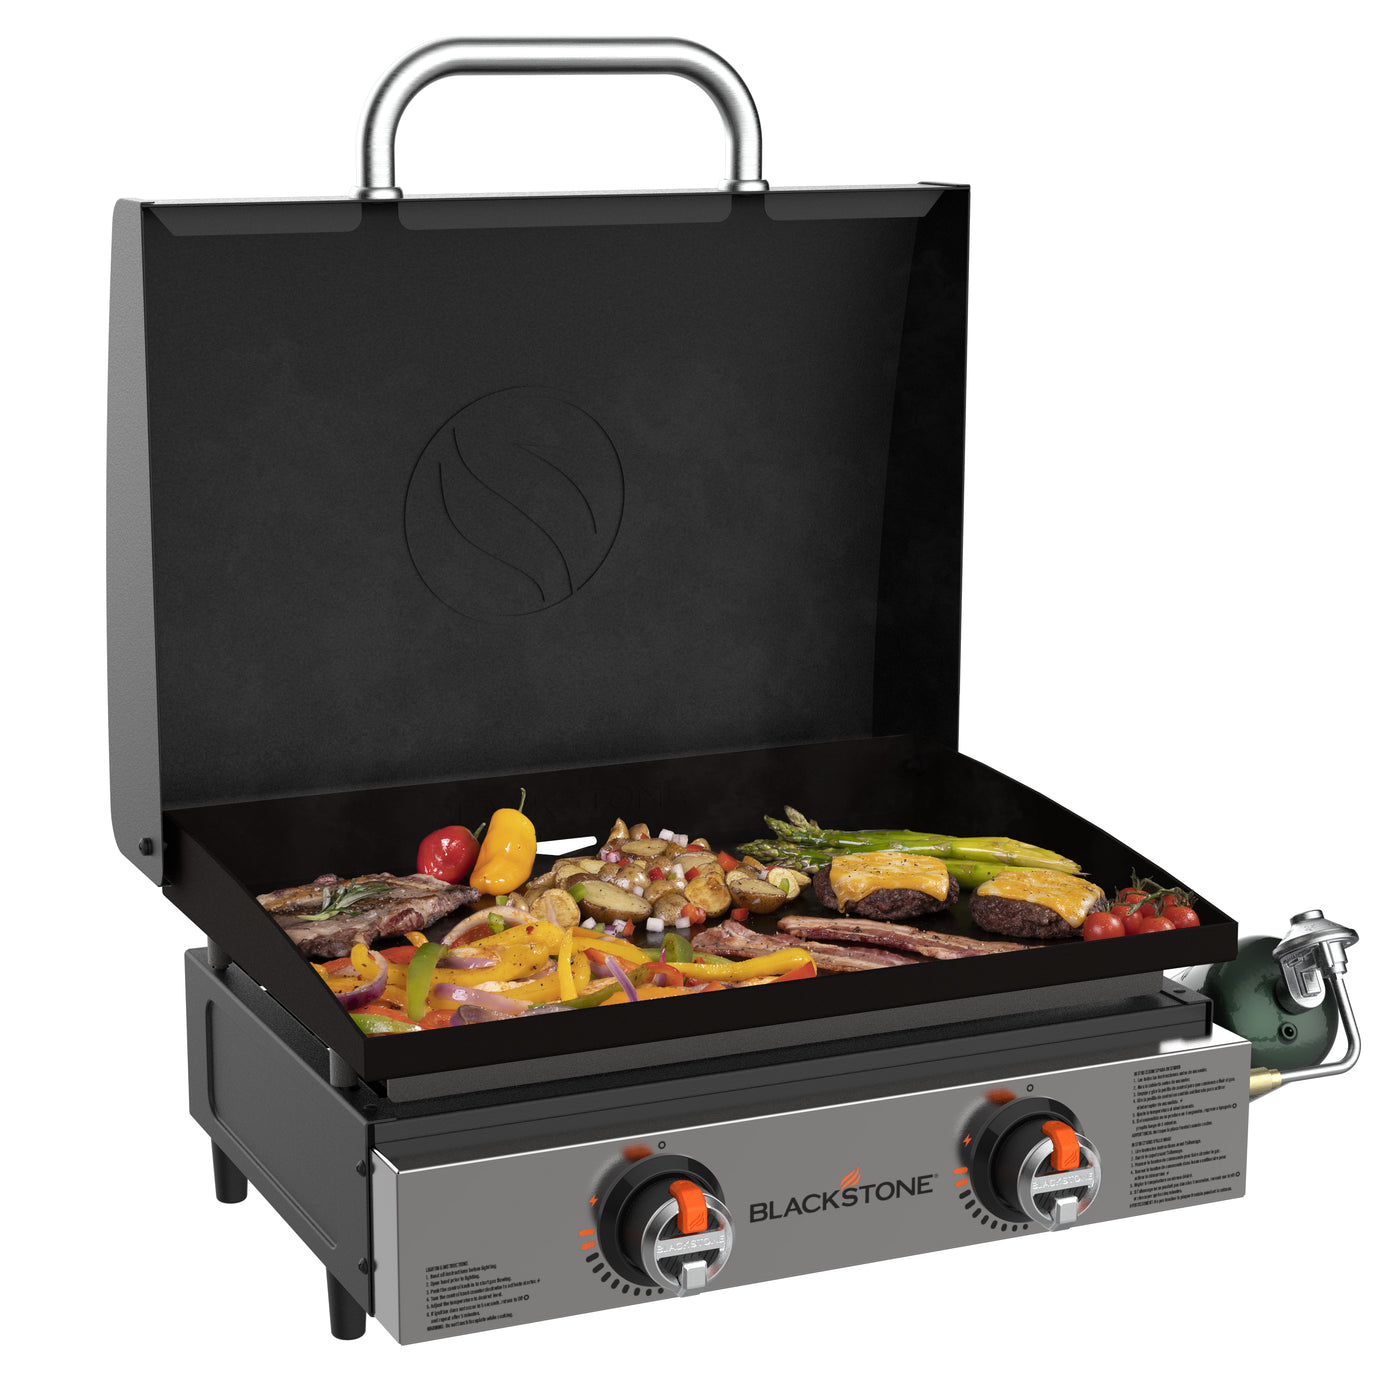 Blackstone 22" Stainless Front Panel Tabletop Griddle - Delivery in May